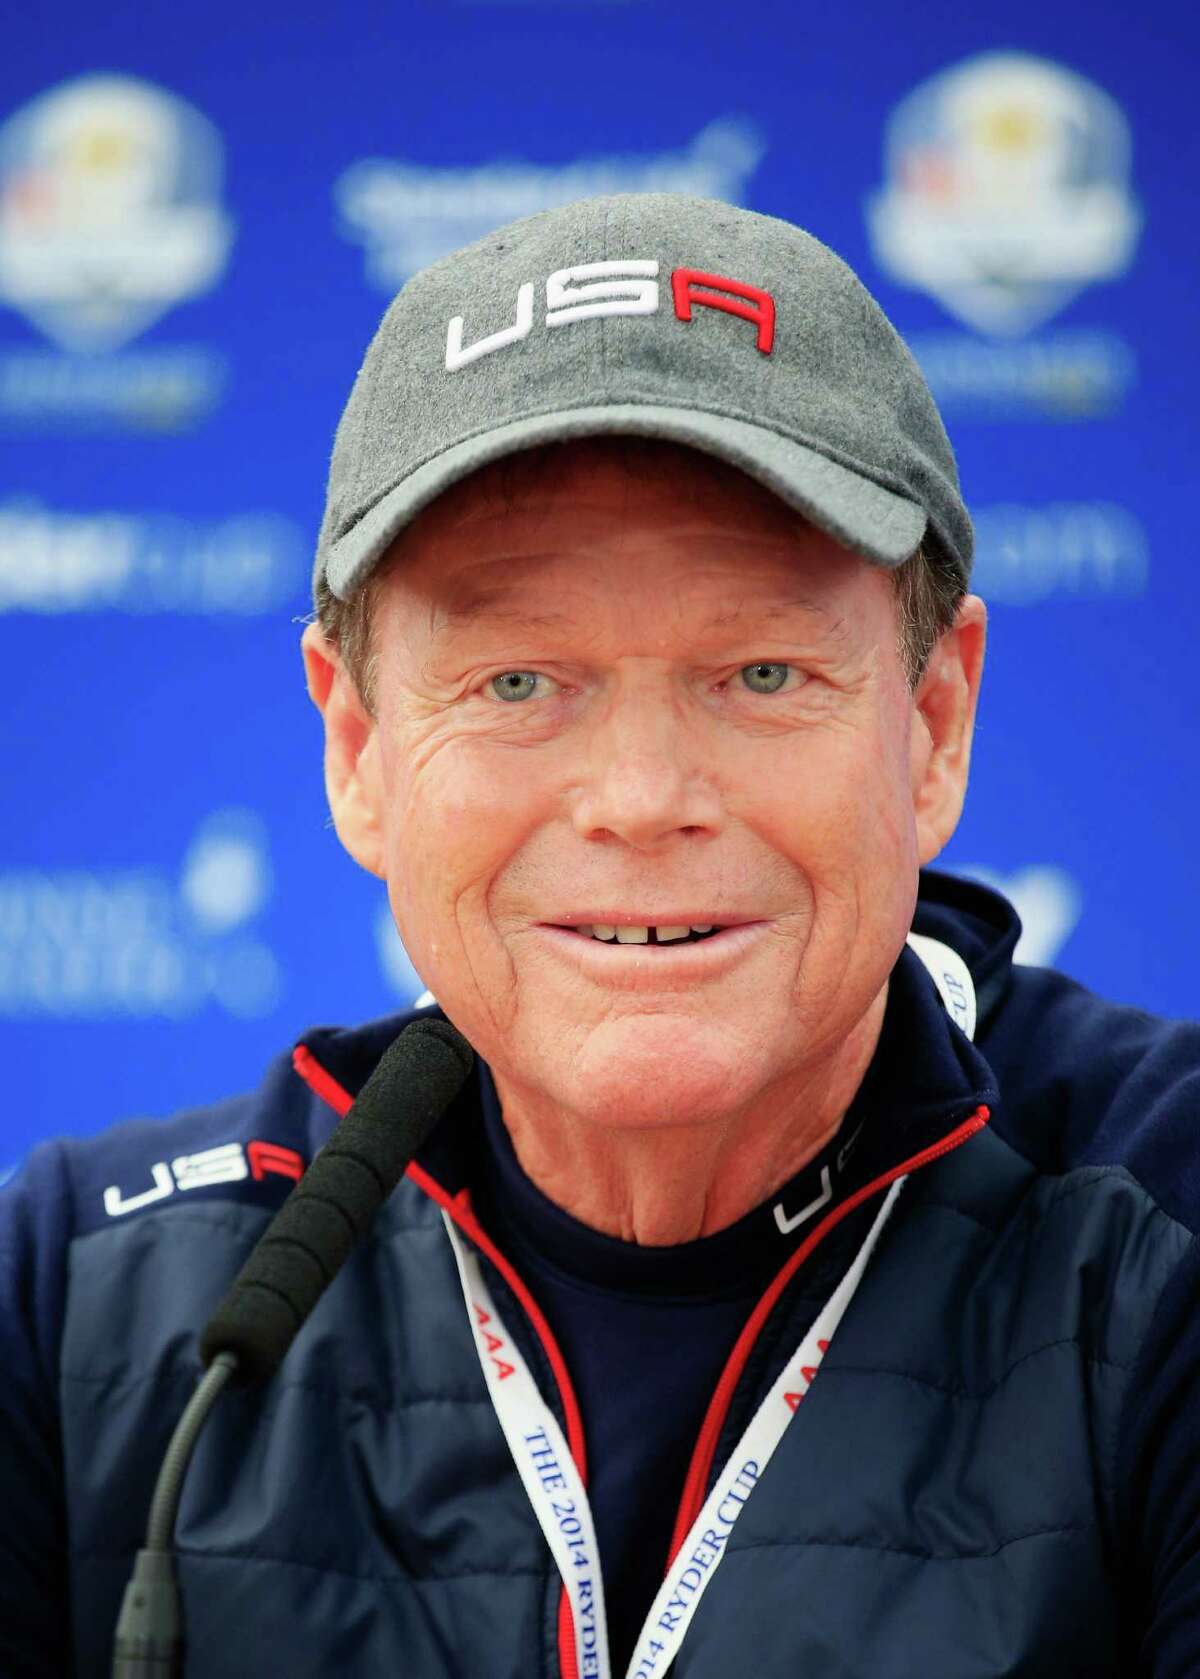 AUCHTERARDER, SCOTLAND - SEPTEMBER 24: United States team captain Tom Watson speaks to the media ahead of the 2014 Ryder Cup on the PGA Centenary course at the Gleneagles Hotel on September 24, 2014 in Auchterarder, Scotland. (Photo by Jamie Squire/Getty Images)